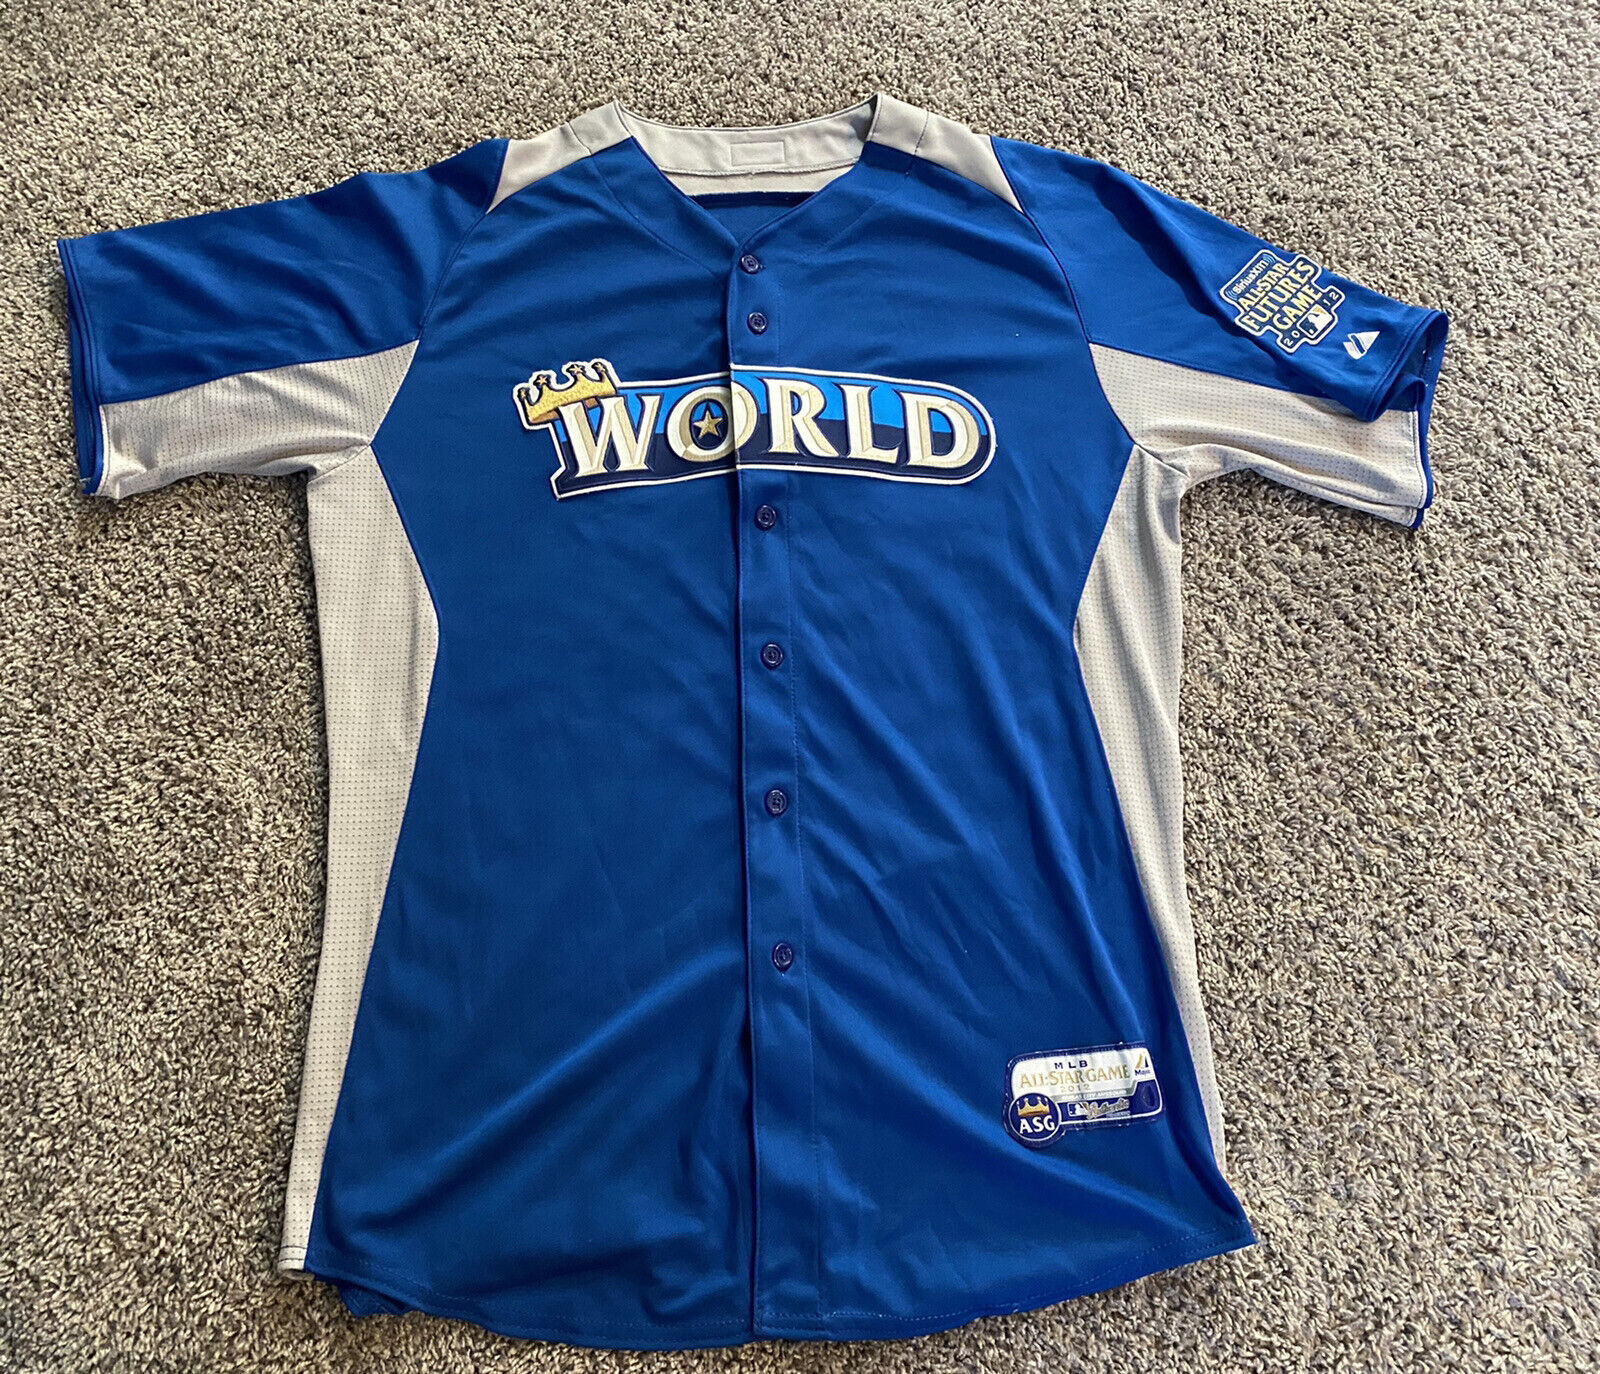 2012 Royals All Star Game Team World Batting Practice Top Size 44